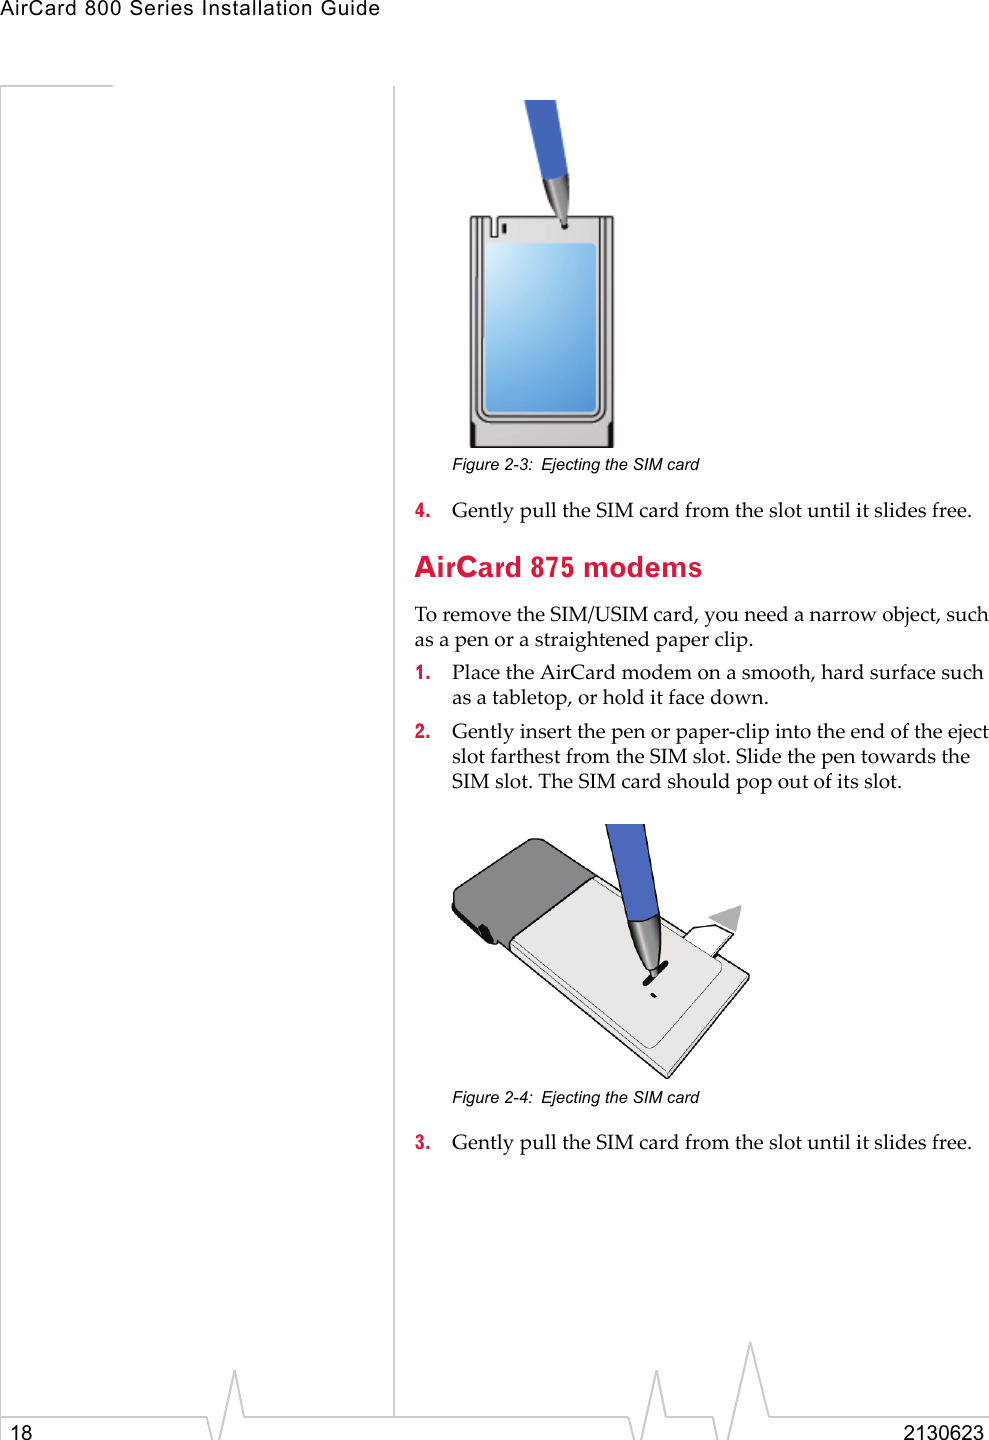 AirCard 800 Series Installation Guide18 2130623Figure 2-3: Ejecting the SIM card4. Gently pull the SIM card from the slot until it slides free.AirCard 875 modemsTo remove the SIM/USIM card, you need a narrow object, such as a pen or a straightened paper clip.1. Place the AirCard modem on a smooth, hard surface such as a tabletop, or hold it face down.2. Gently insert the pen or paper-clip into the end of the eject slot farthest from the SIM slot. Slide the pen towards the SIM slot. The SIM card should pop out of its slot.Figure 2-4: Ejecting the SIM card3. Gently pull the SIM card from the slot until it slides free.